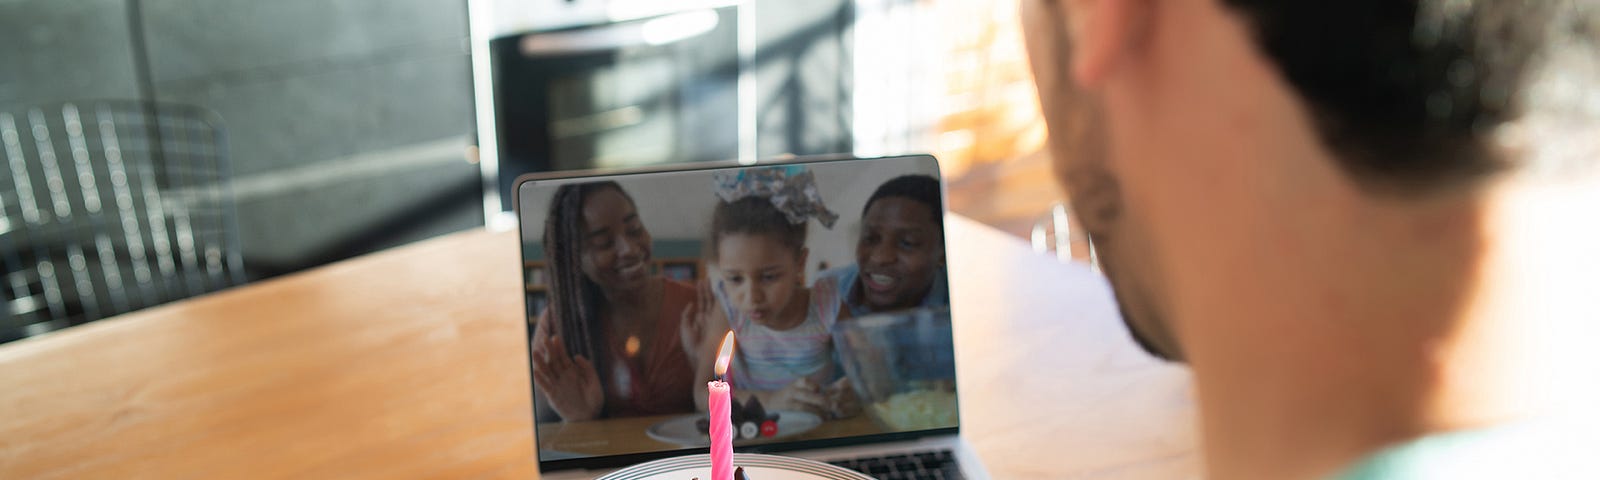 A photograph of a person holding a cupcake with a candle up to a laptop screen. The laptop has a video call with two adult and a young child, who is leaning forward and blowing towards where the candle is.